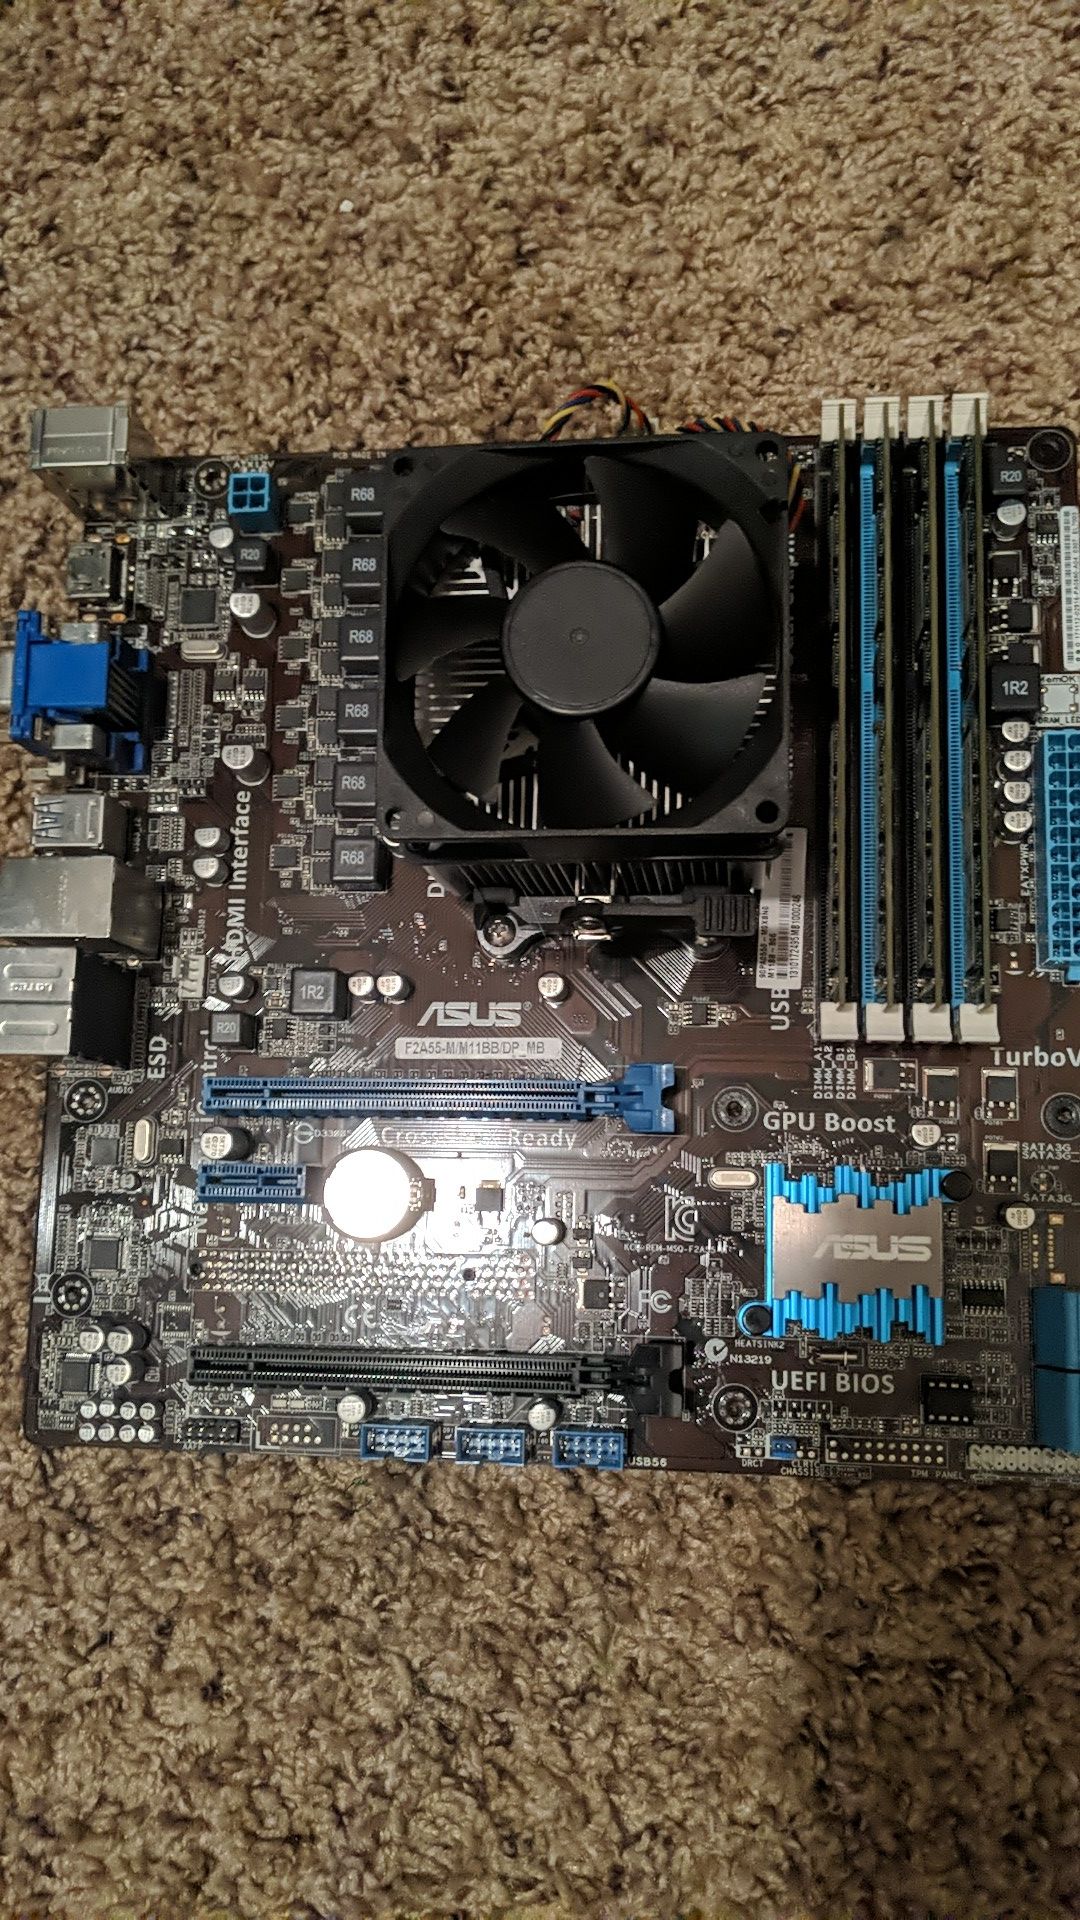 Used PC parts check description for model names. Price negotiable on all items.